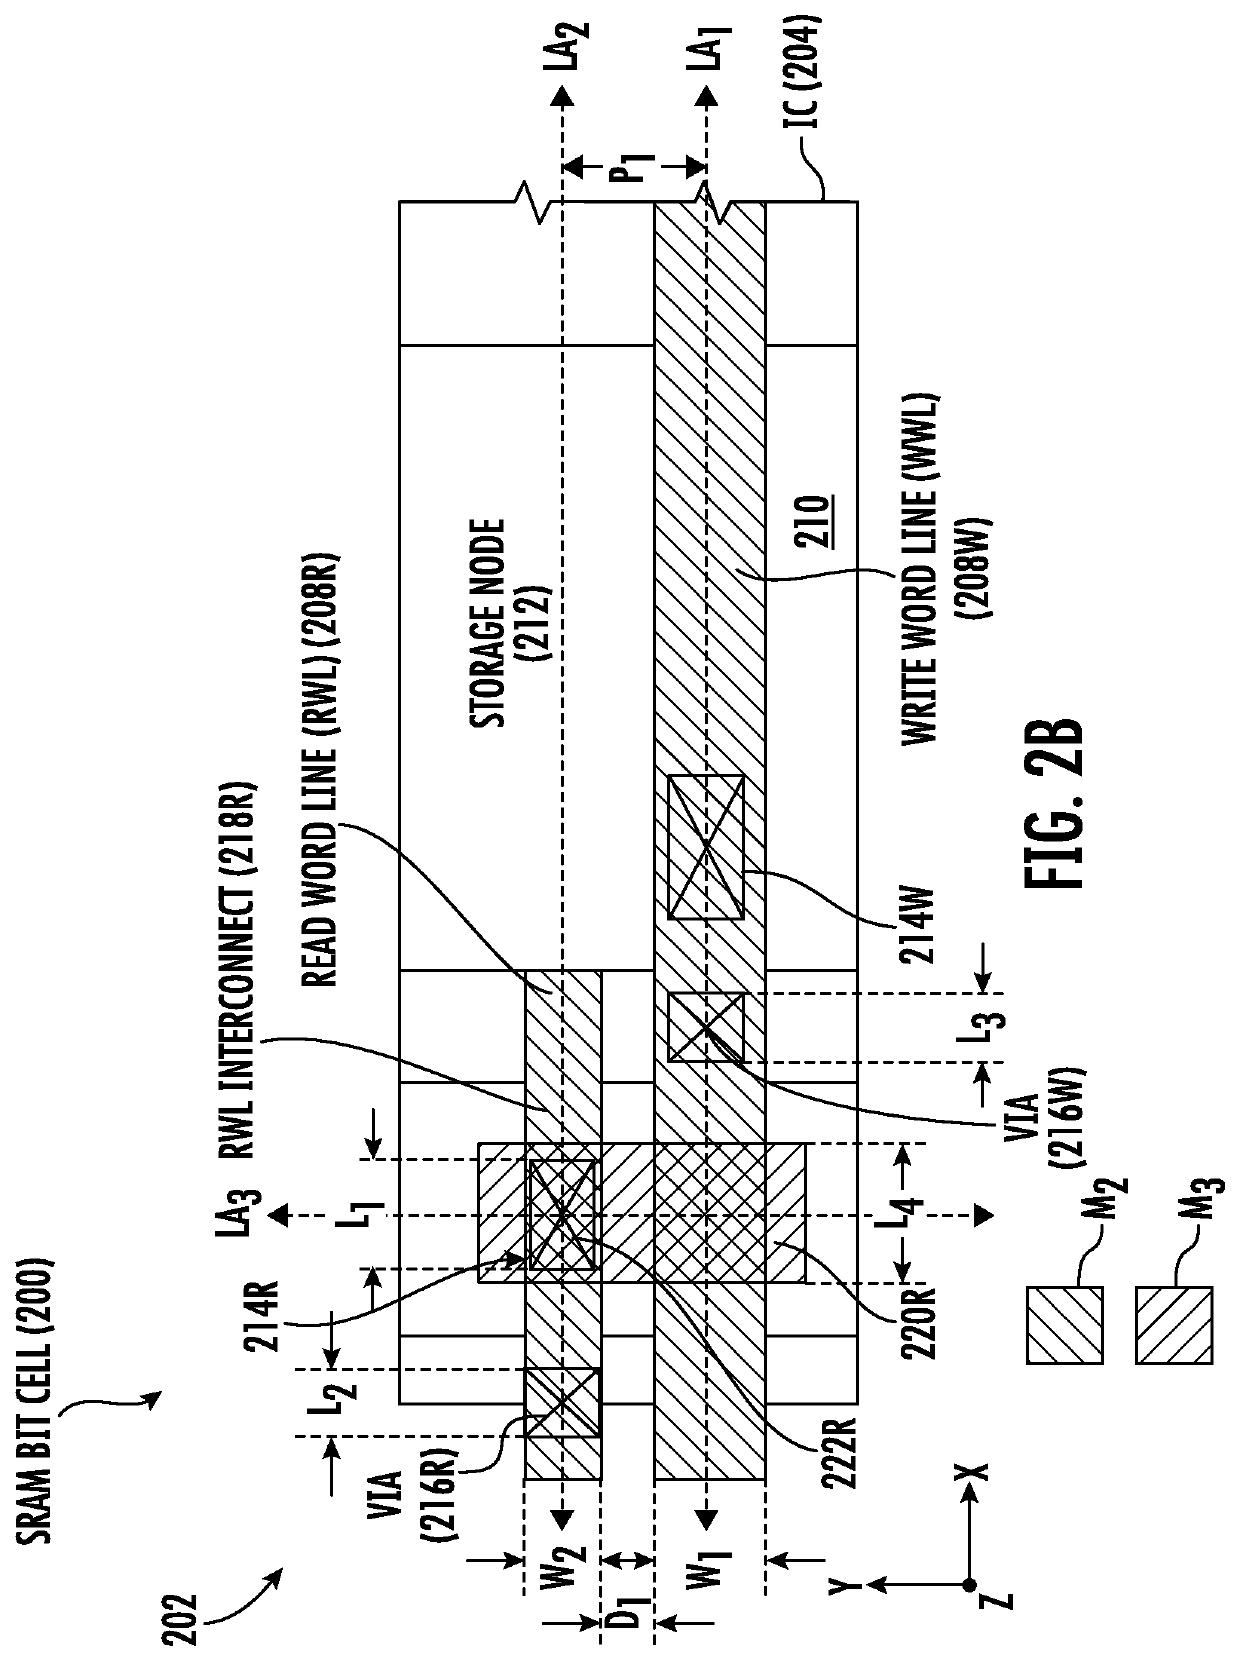 Static random access memory (SRAM) bit cells employing asymmetric width read and write word lines, and related methods